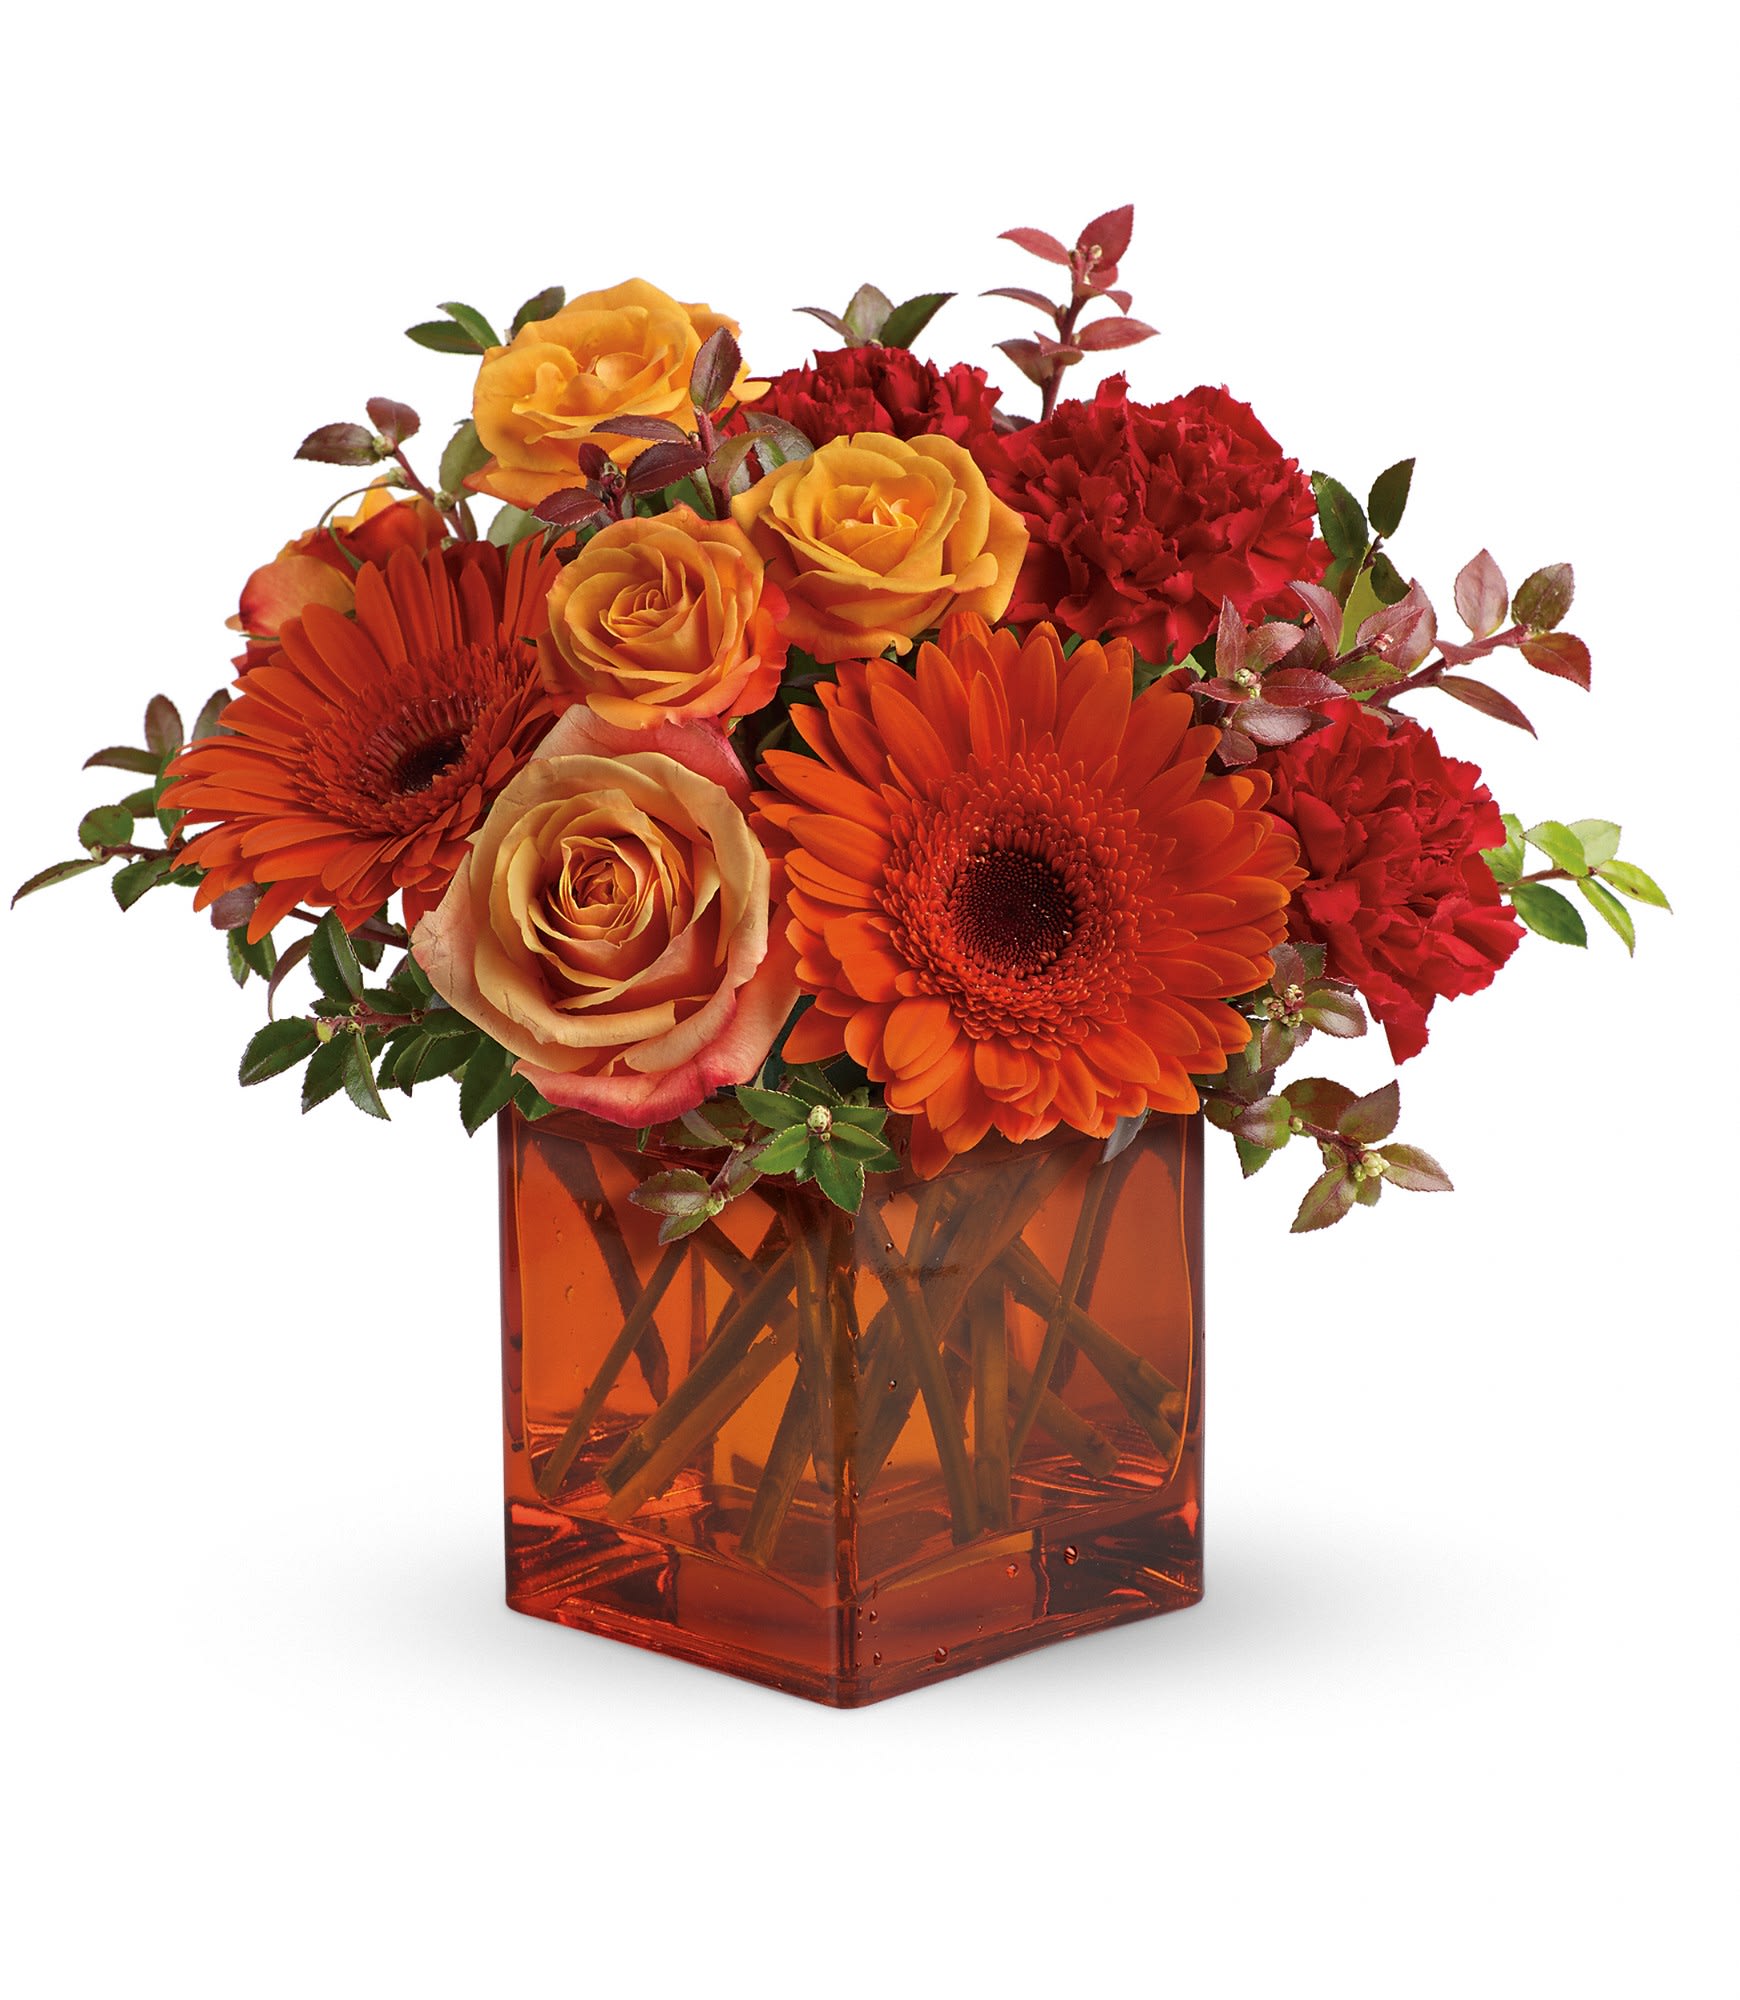 Teleflora's Sunrise Sunset - Sunrise, sunset, swiftly fly the days. So don't let another day go by without letting someone you know that you are thinking of them. This delightful arrangement will brighten anyone's morning, noon and night.    Fiery orange roses, spray roses and gerberas plus red carnations and huckleberry, are arranged in an exclusive orange cube vase. This arrangement is bound to get glowing reviews and thank-yous!    Approximately 8&quot; W x 9&quot; H    Orientation: One-Sided    As Shown : T47-1A  Deluxe : T47-1B  Premium : T47-1C